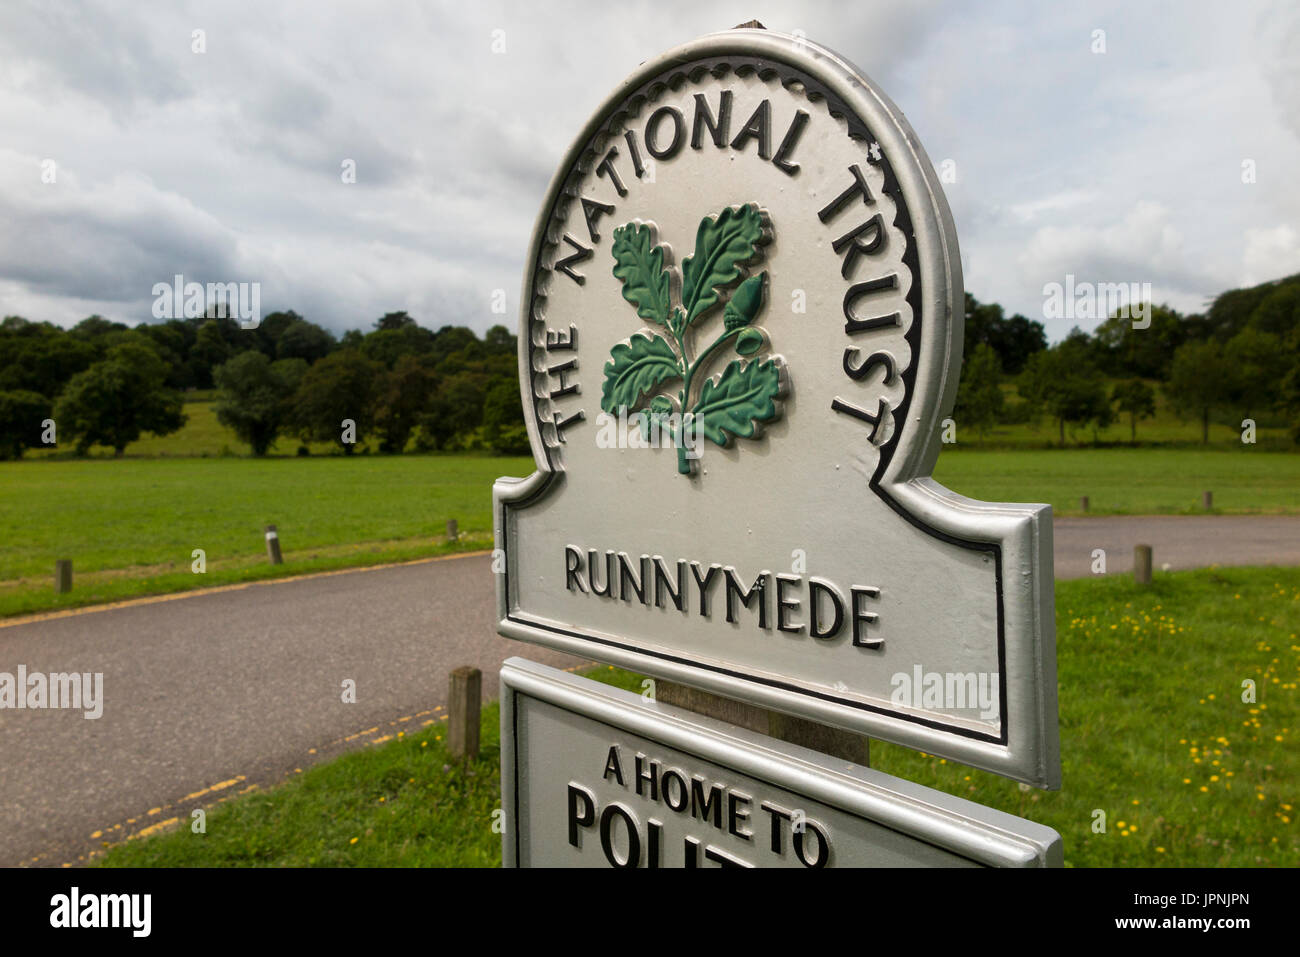 National Trust sign / signpost / post; Runnymede, Surrey. UK. Runnymede was the site of the signing of Magna Carta in year 1215. (89) Stock Photo